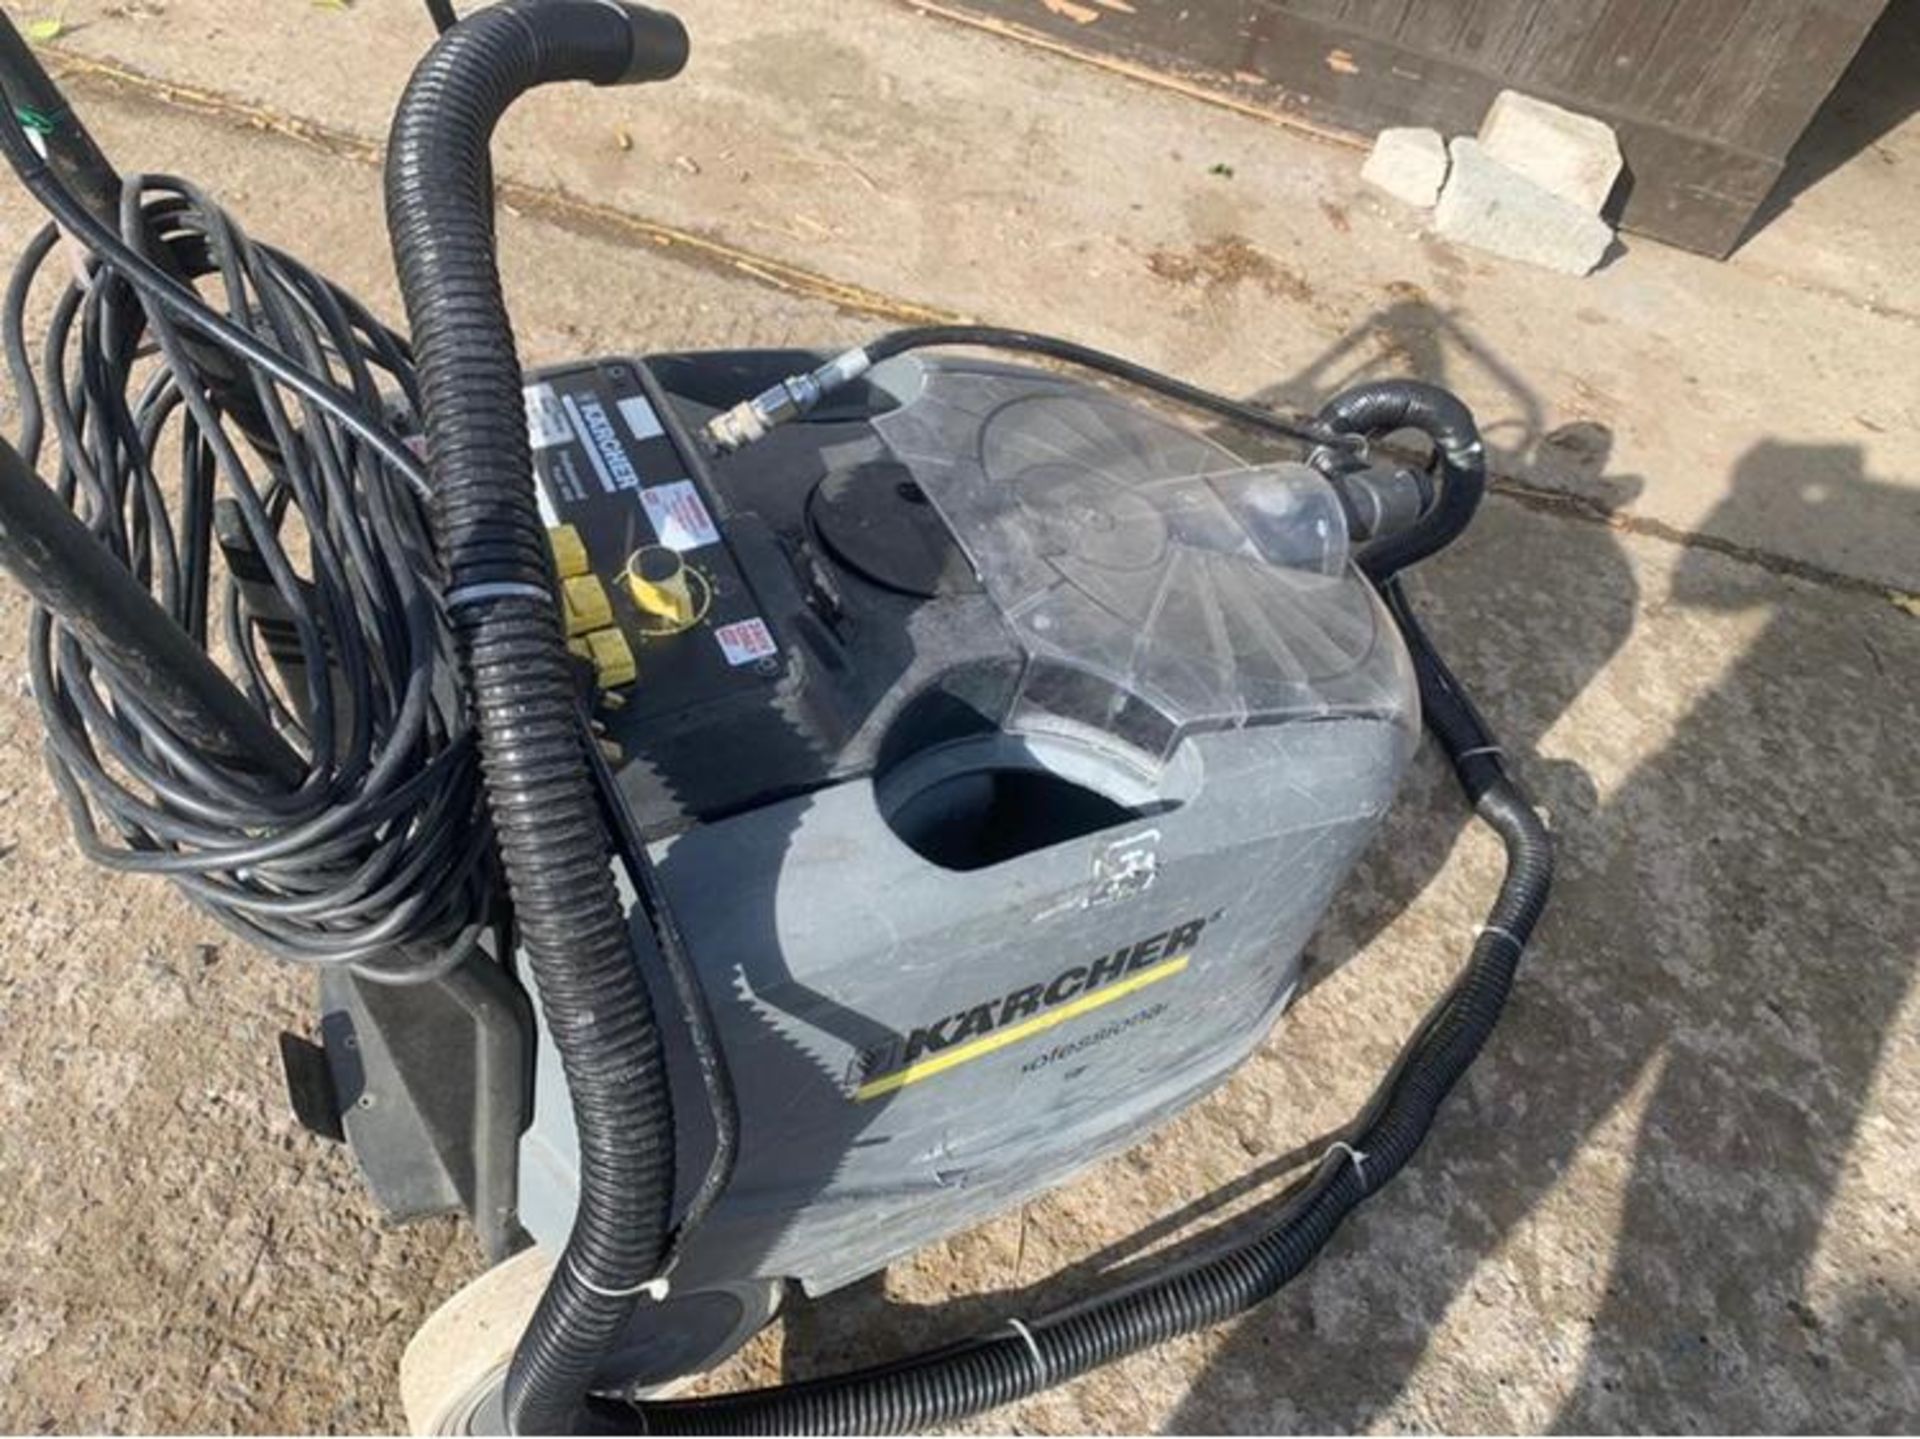 KARCHER WET AND DRY COMMERCIAL PUZZI 240V.LOCATION N IRELAND. - Image 2 of 4